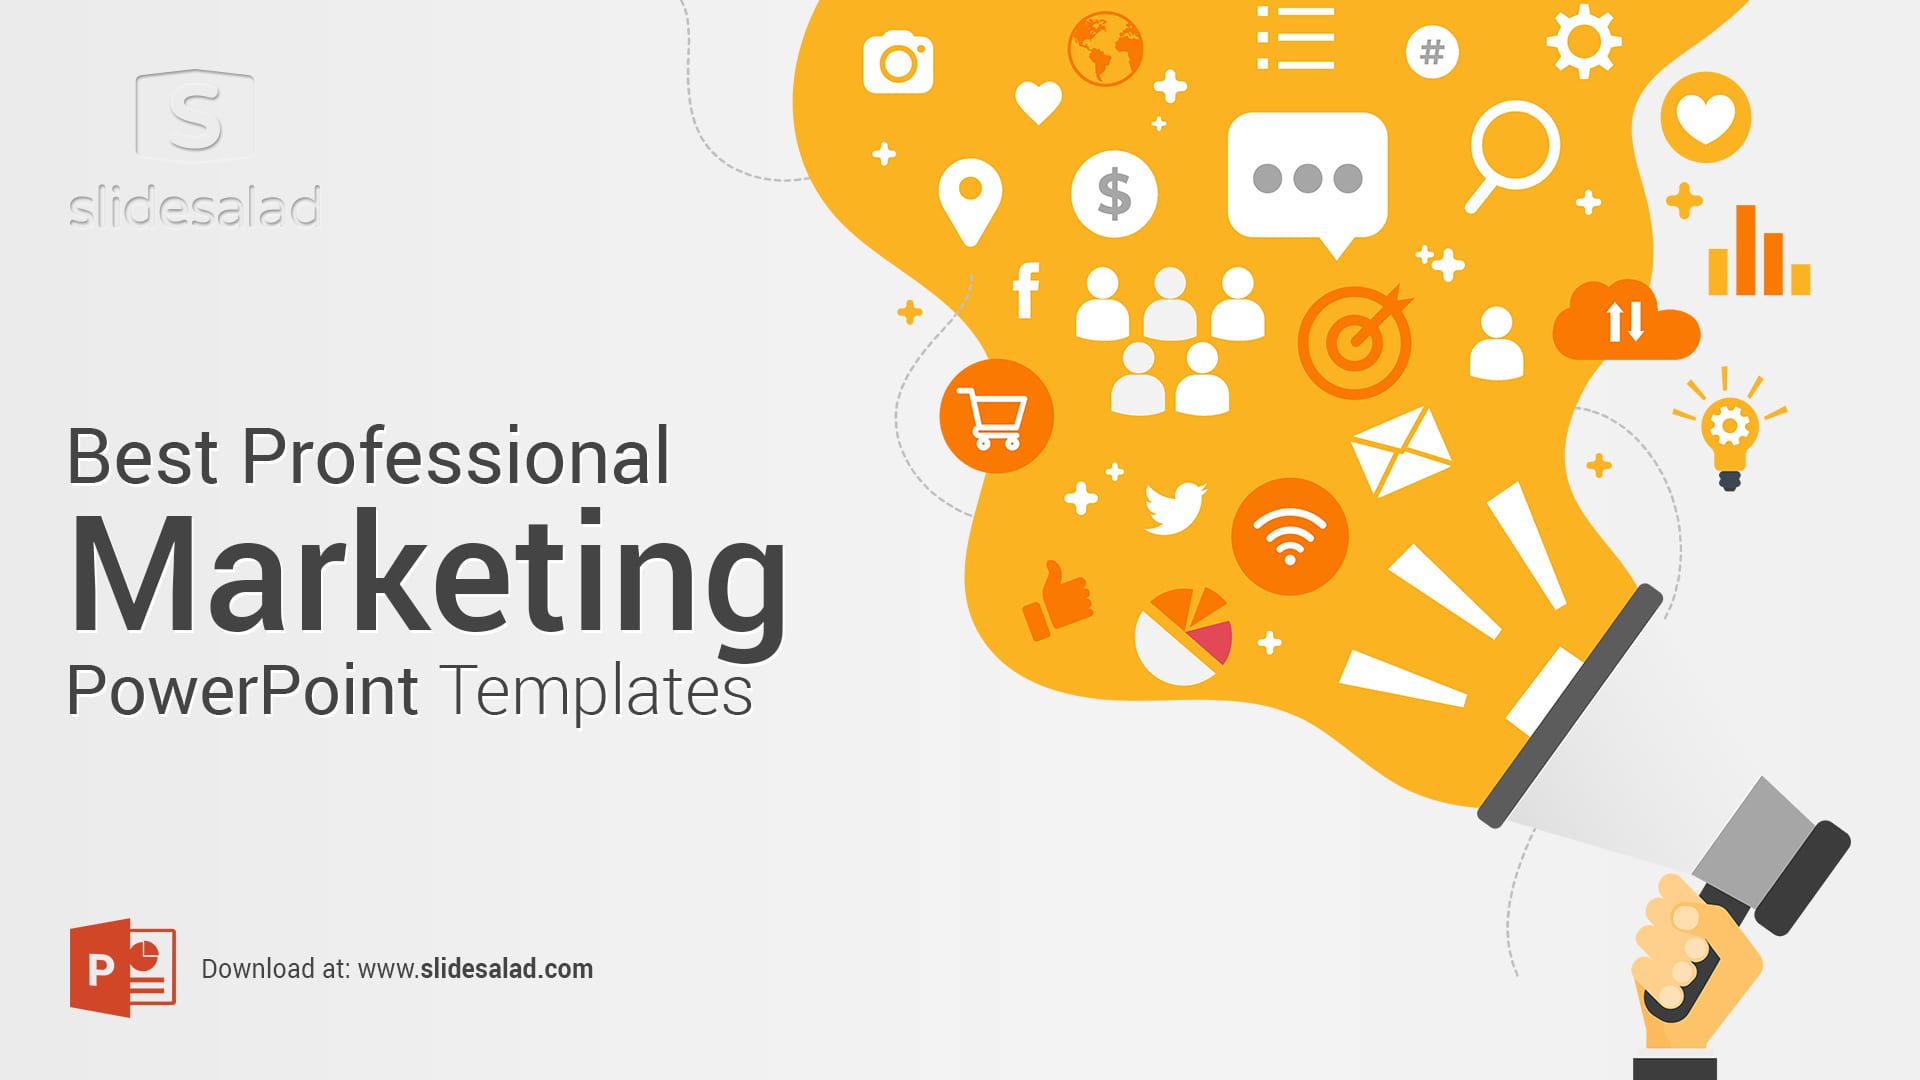 Best Professional Marketing PowerPoint Templates for 2023 - SlideSalad